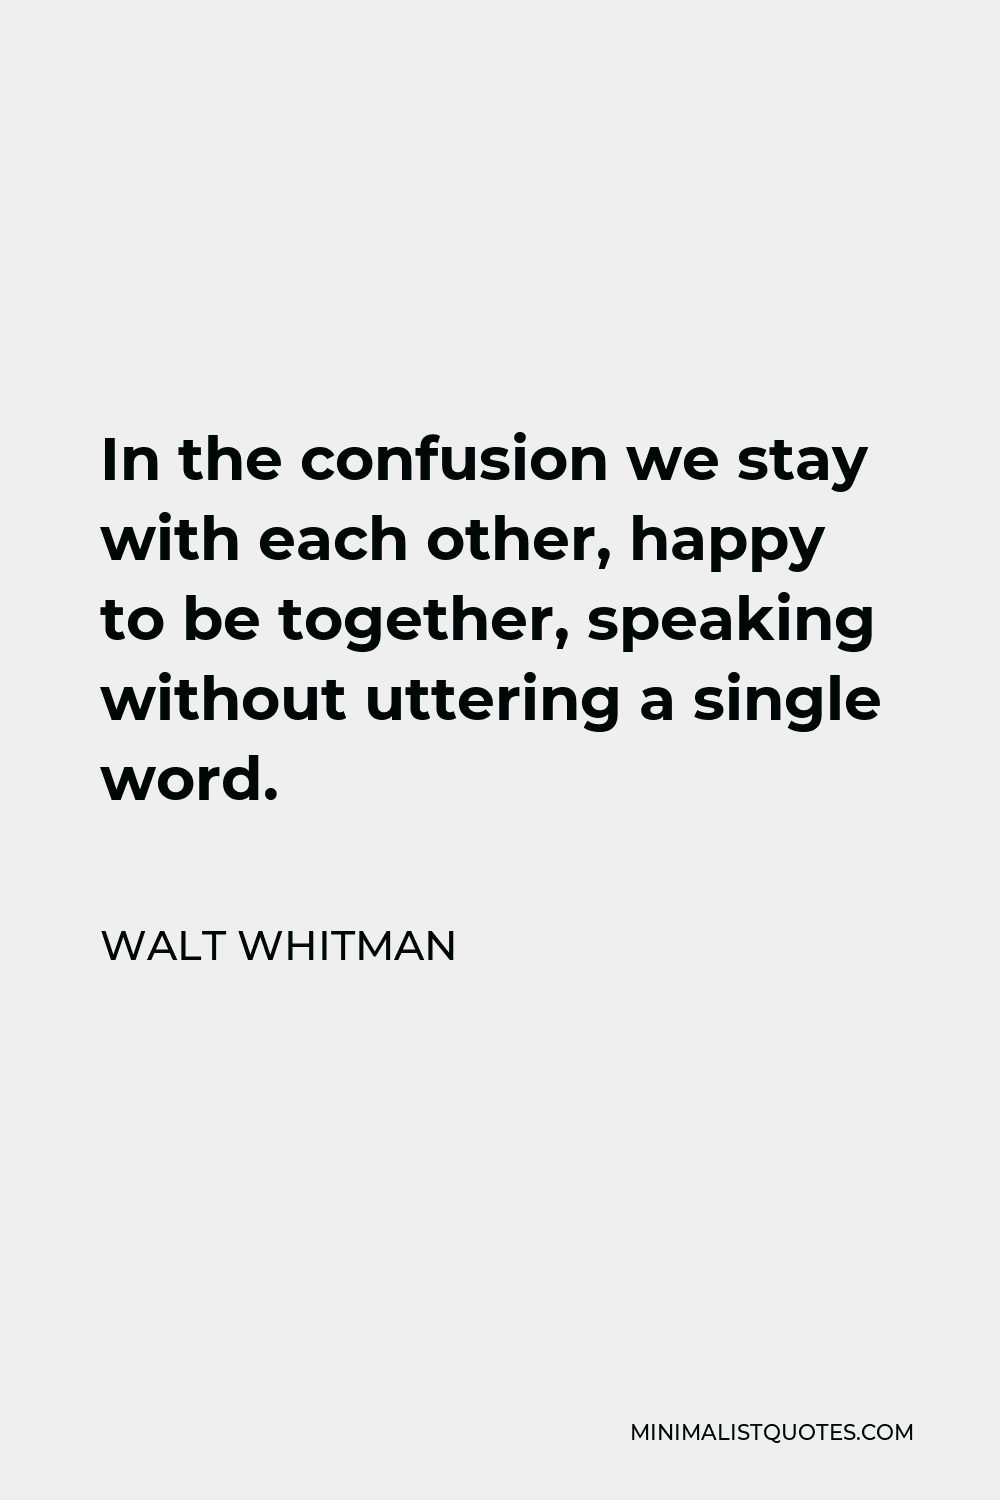 Walt Whitman Quote - In the confusion we stay with each other, happy to be together, speaking without uttering a single word.